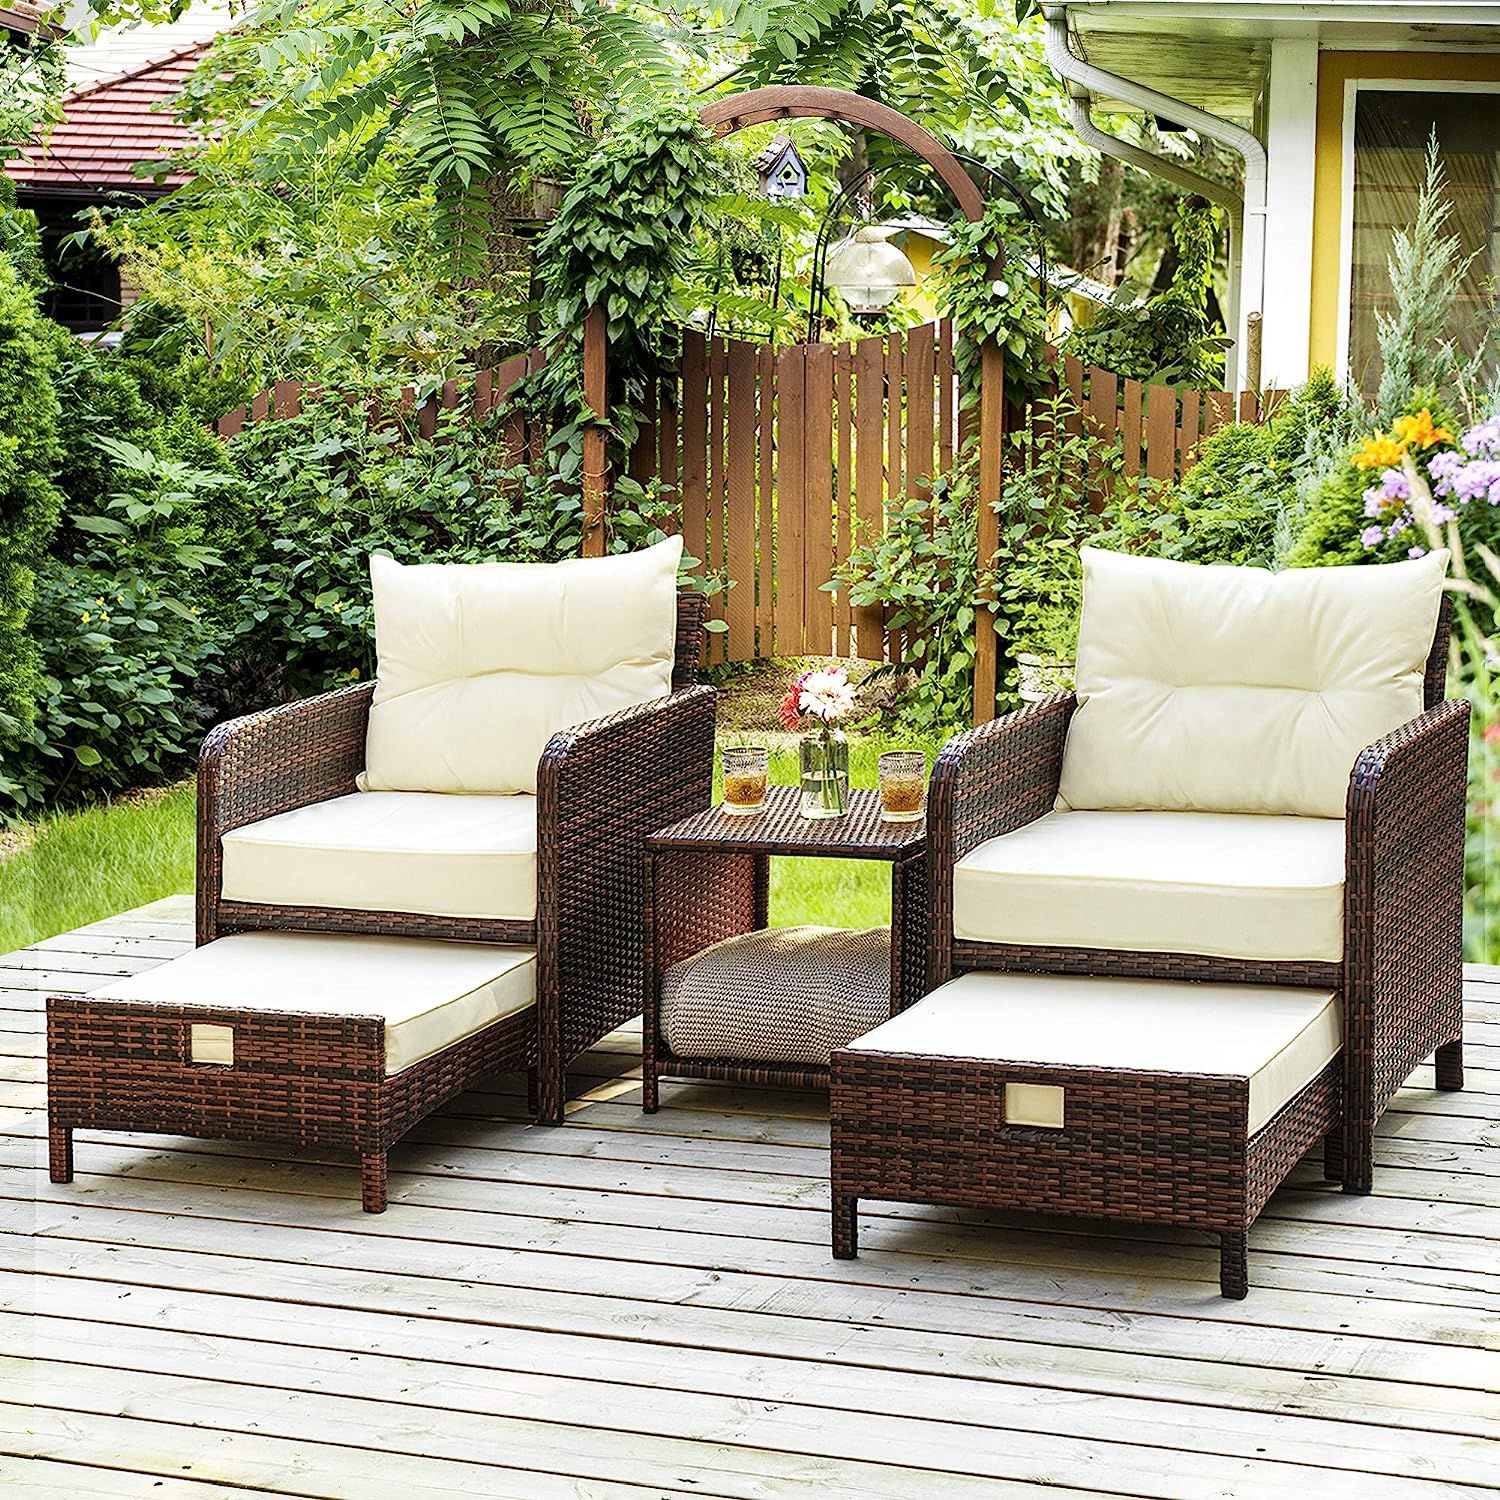 Pamapic 5 Pieces Wicker Patio Furniture Set Outdoor | Ubuy Italy For Ottomans Patio Furniture Set (Photo 2 of 15)